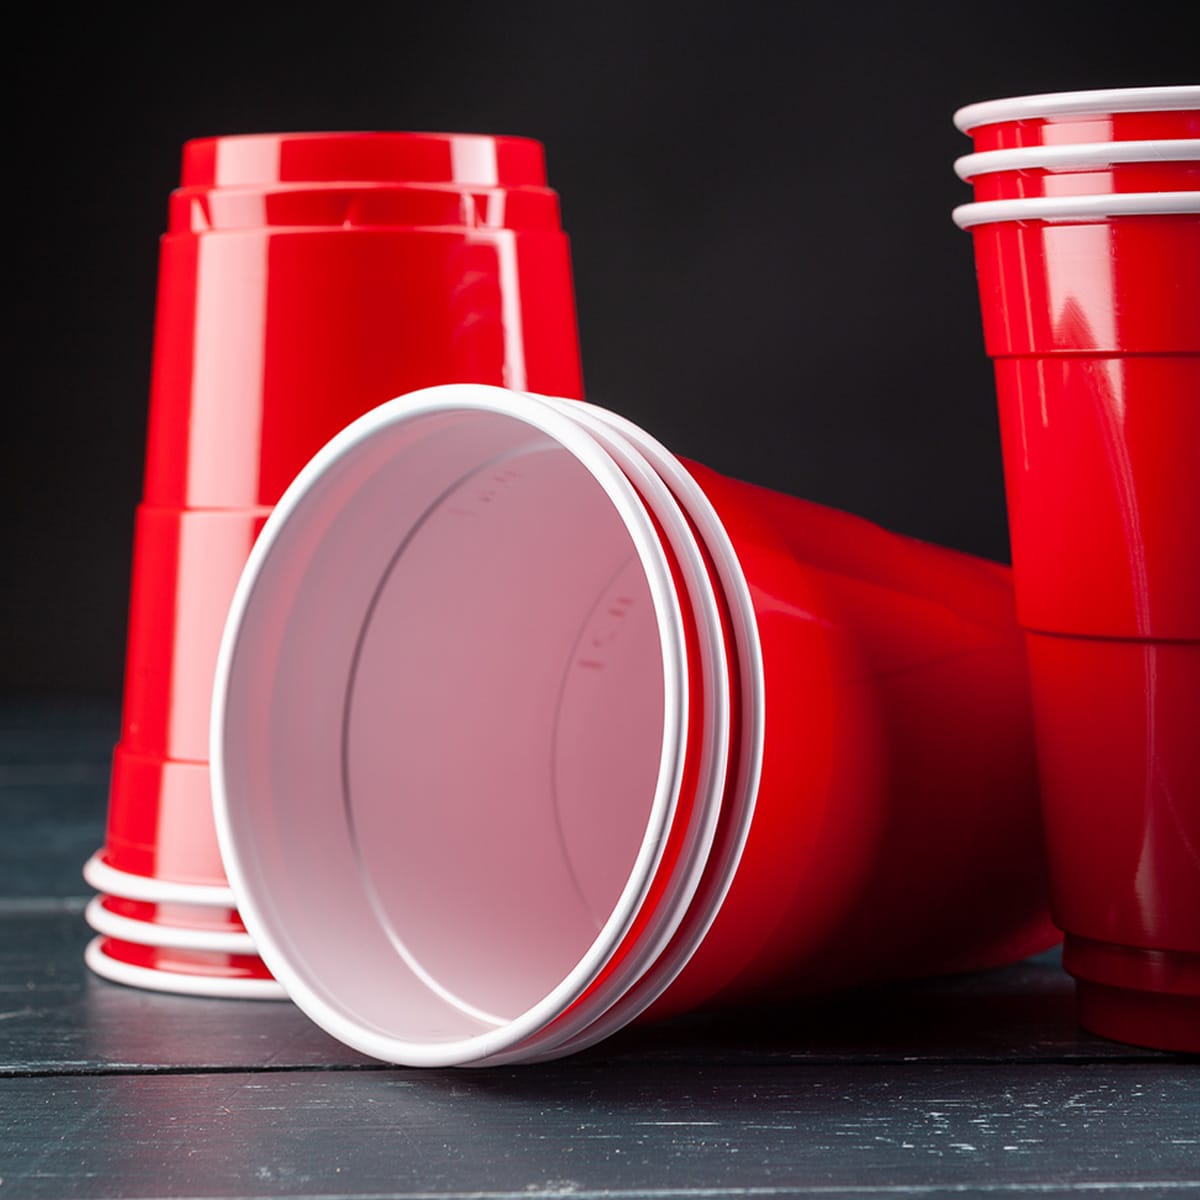 Yes, you can only put red solo cups into your dishwasher and they are “top rack safe.”